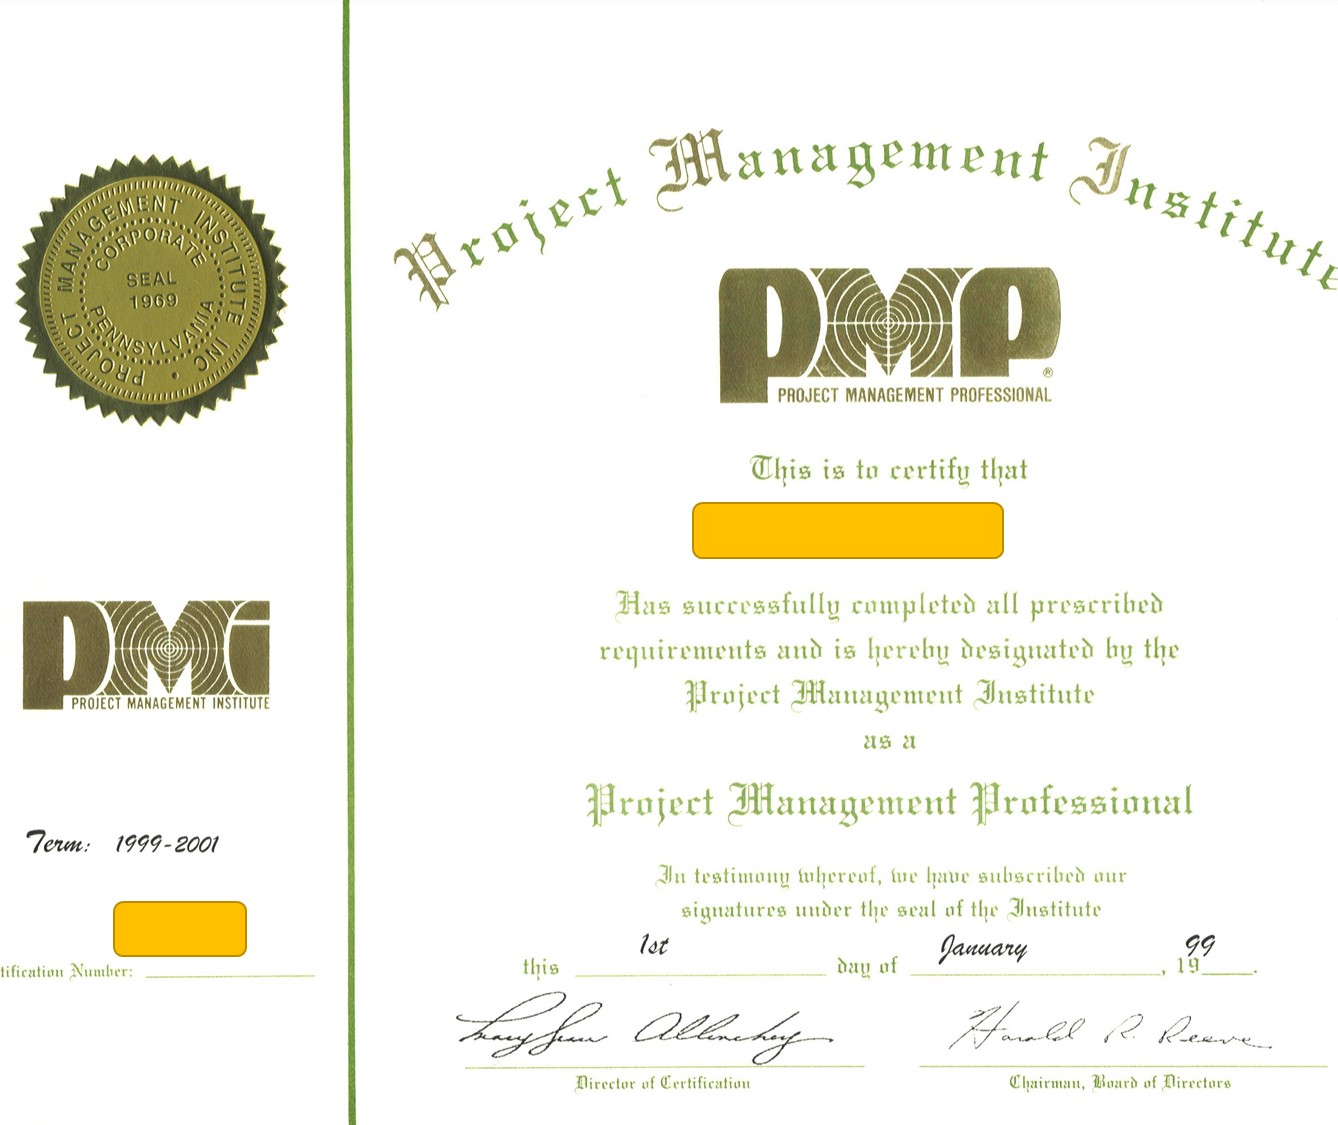 The PMP Certificate from 1998